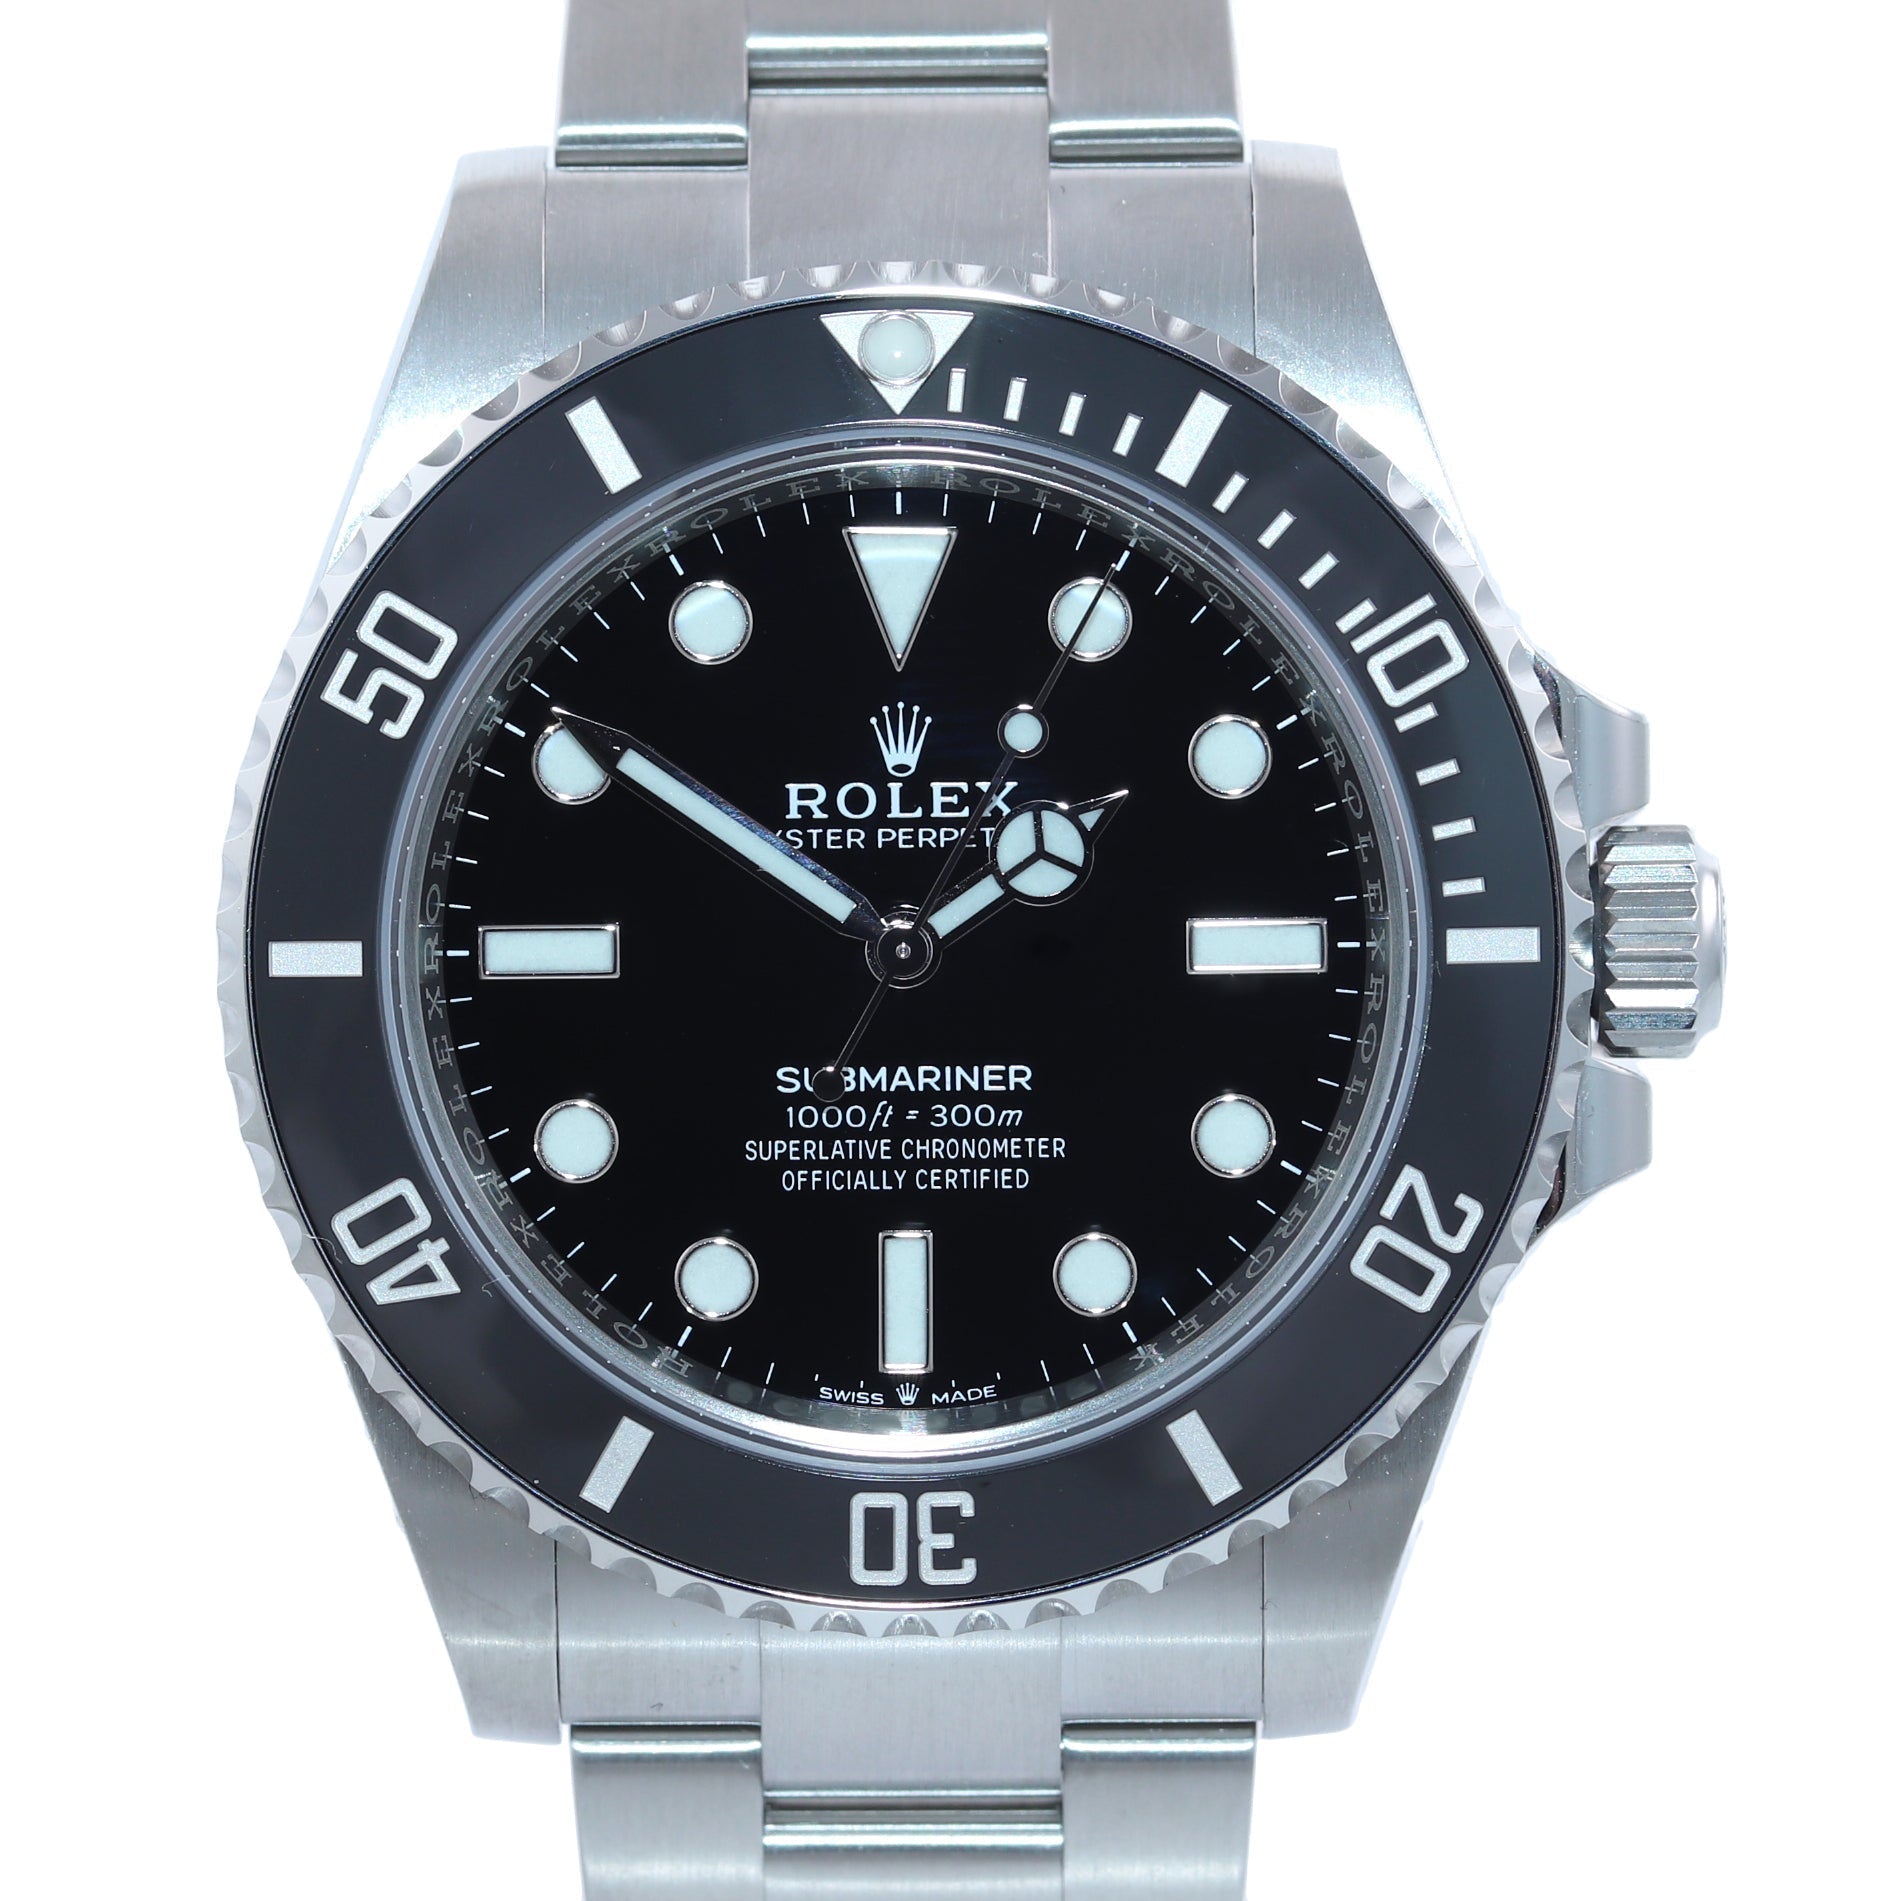 Copy of NEW 2020 PAPERS Rolex Submariner 41mm Black Ceramic 124060LN No Date Watch